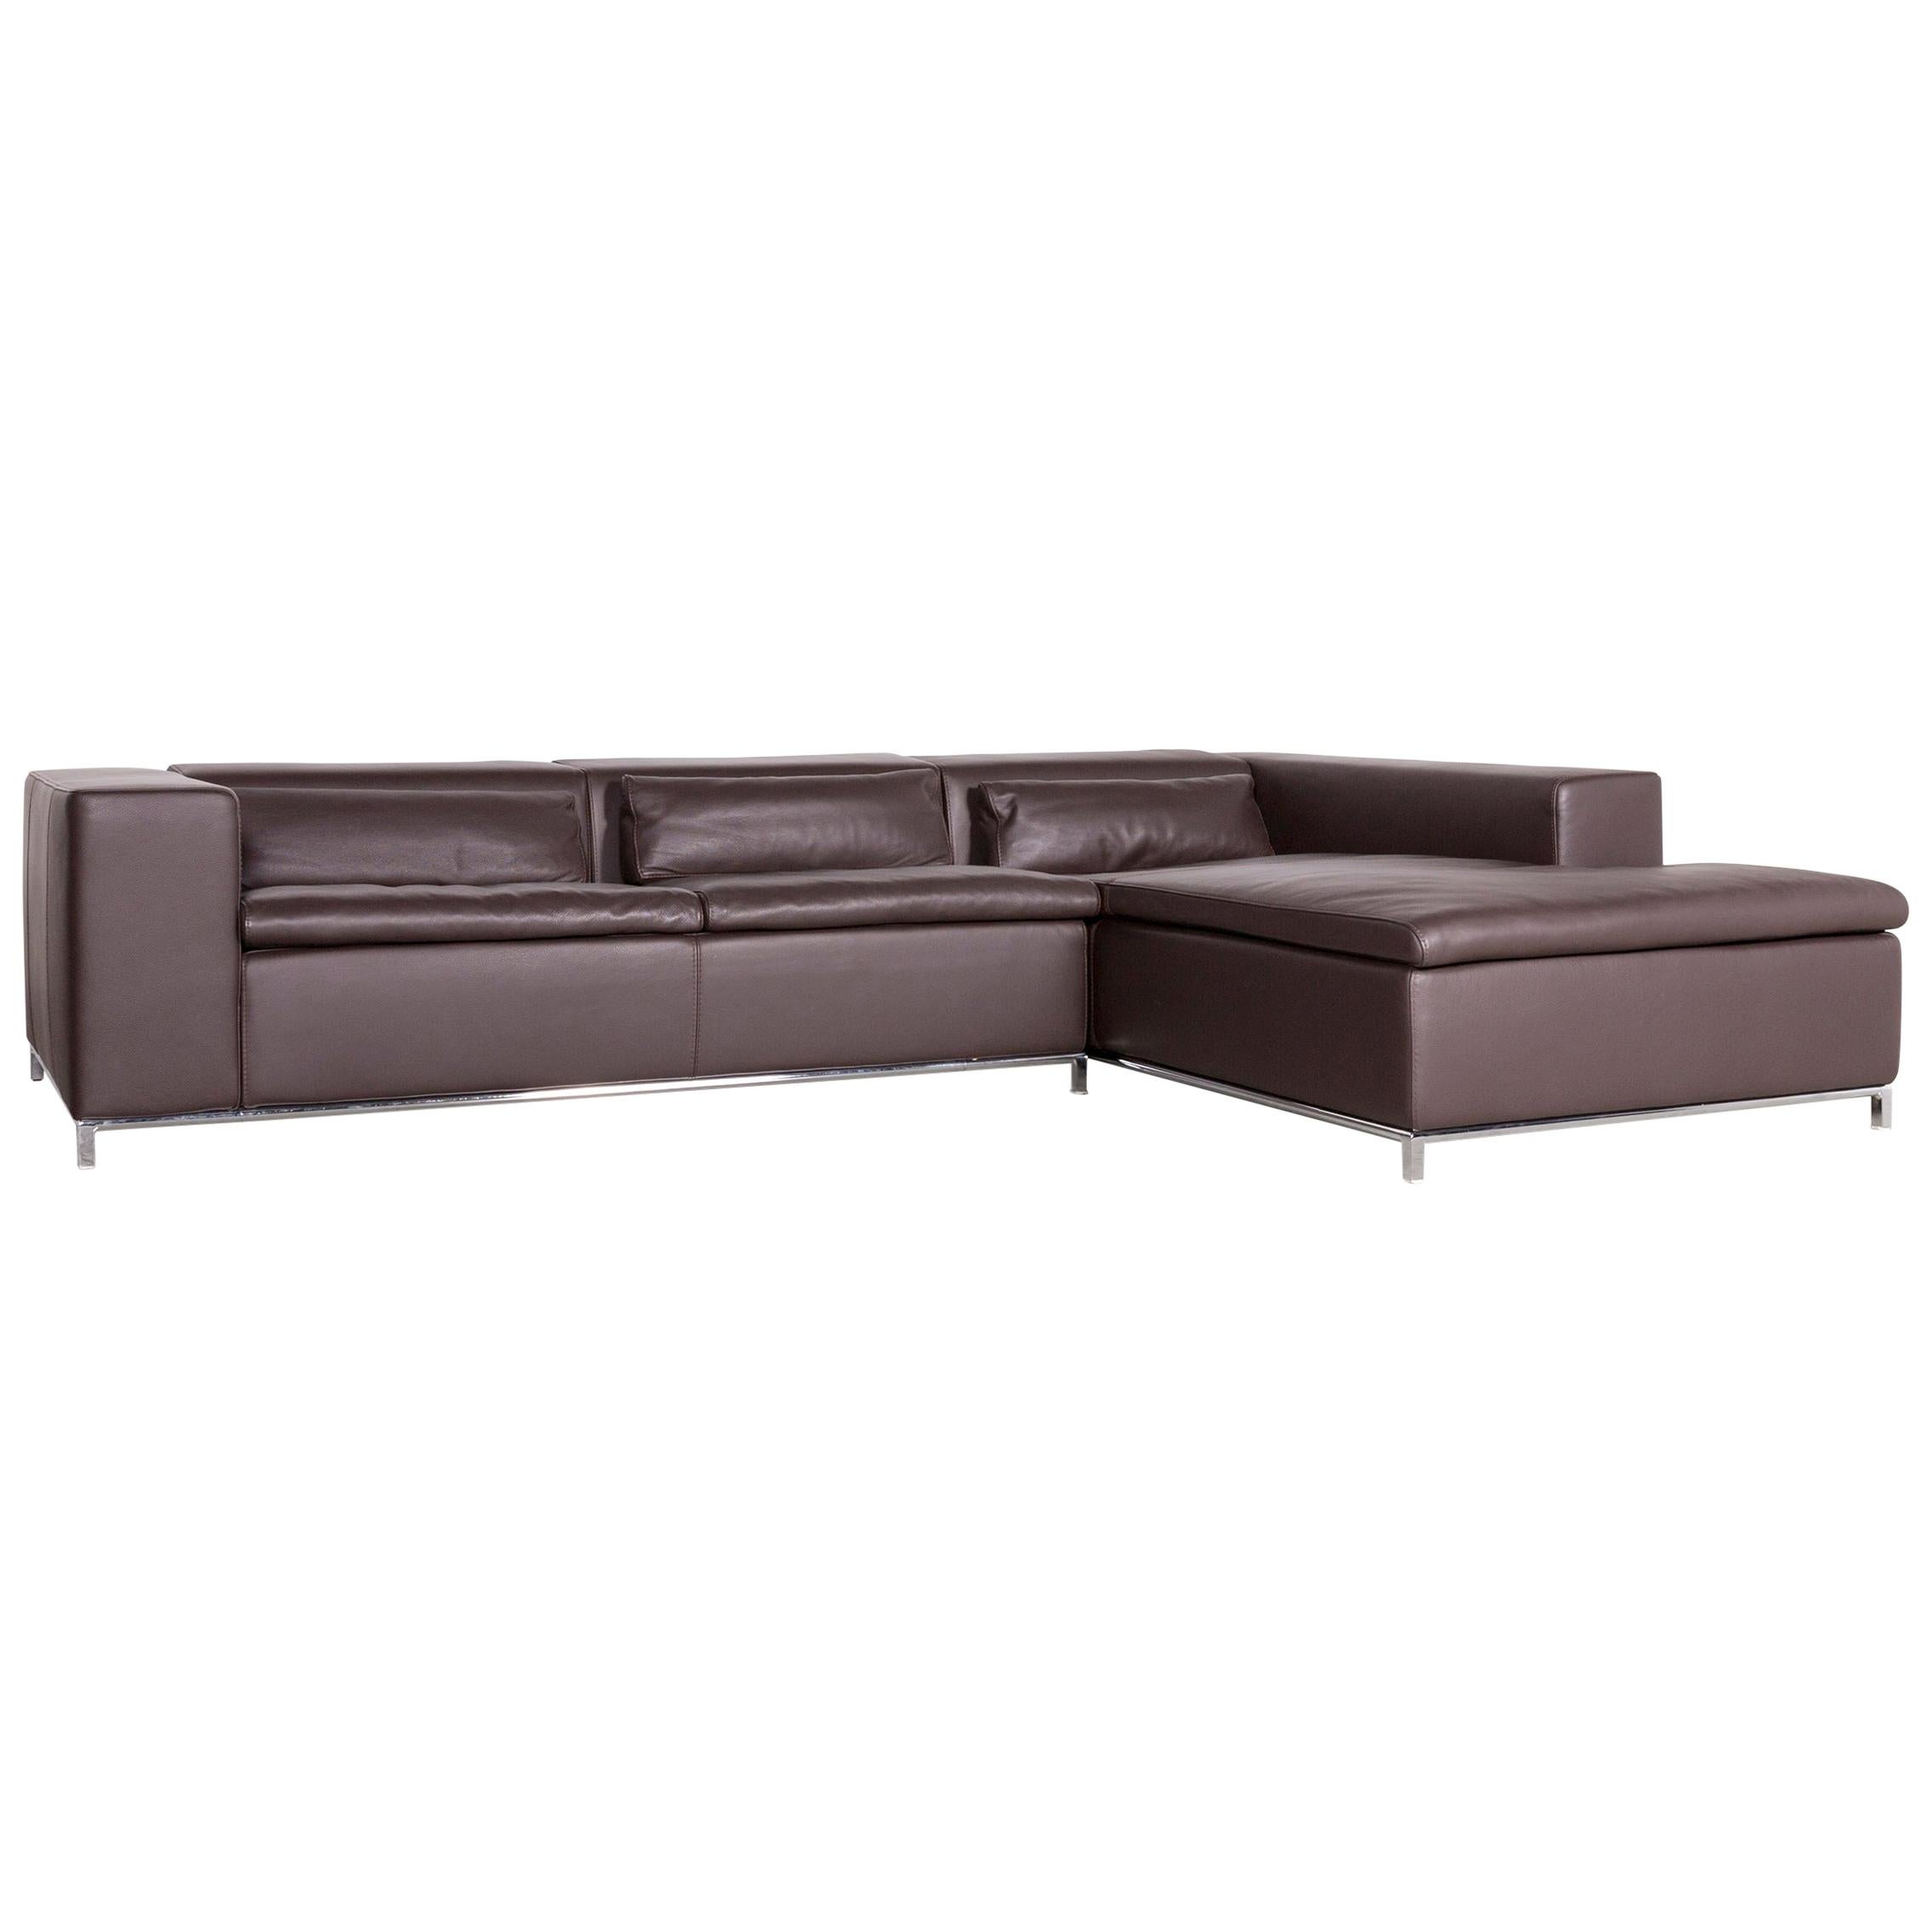 Who's Perfect Designer Leather Corner-Sofa Brown Couch For Sale